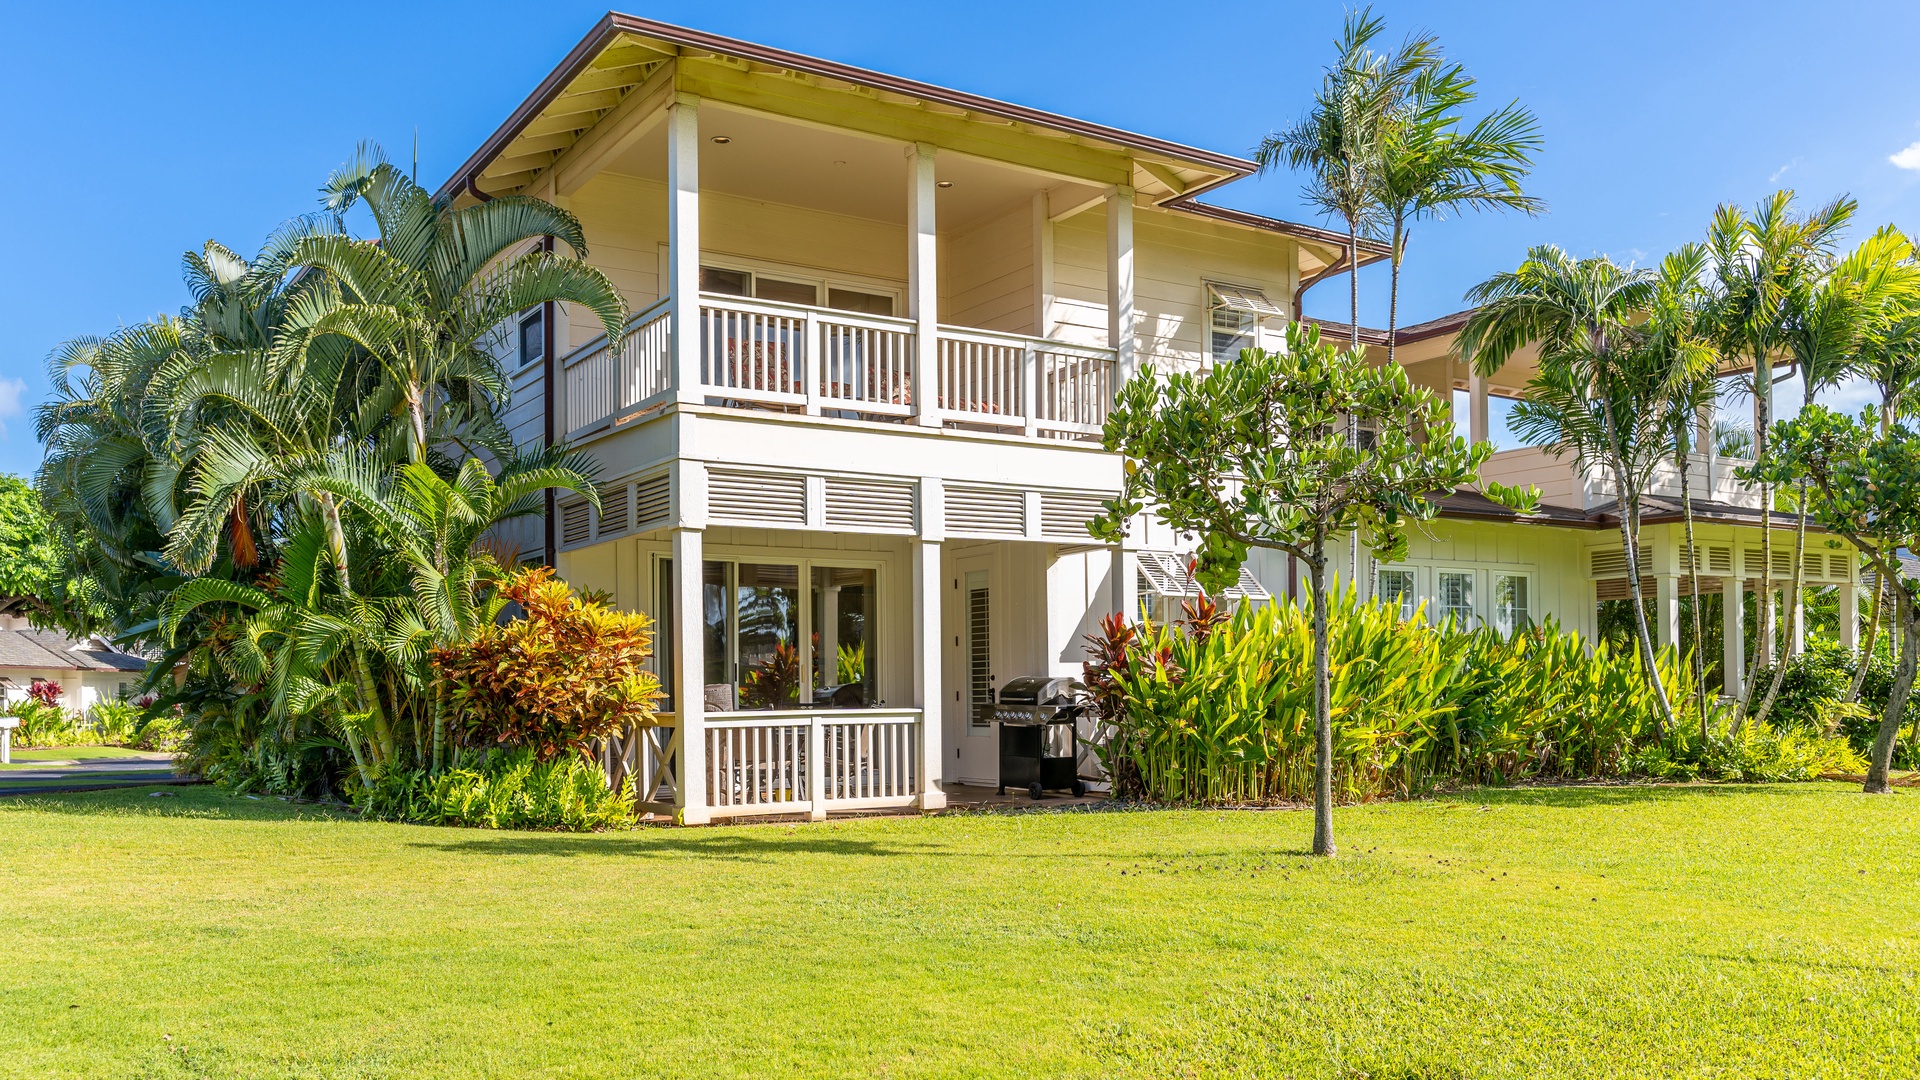 Kapolei Vacation Rentals, Coconut Plantation 1100-2 - The beautiful condo with manicured landscaping under swaying palm trees.